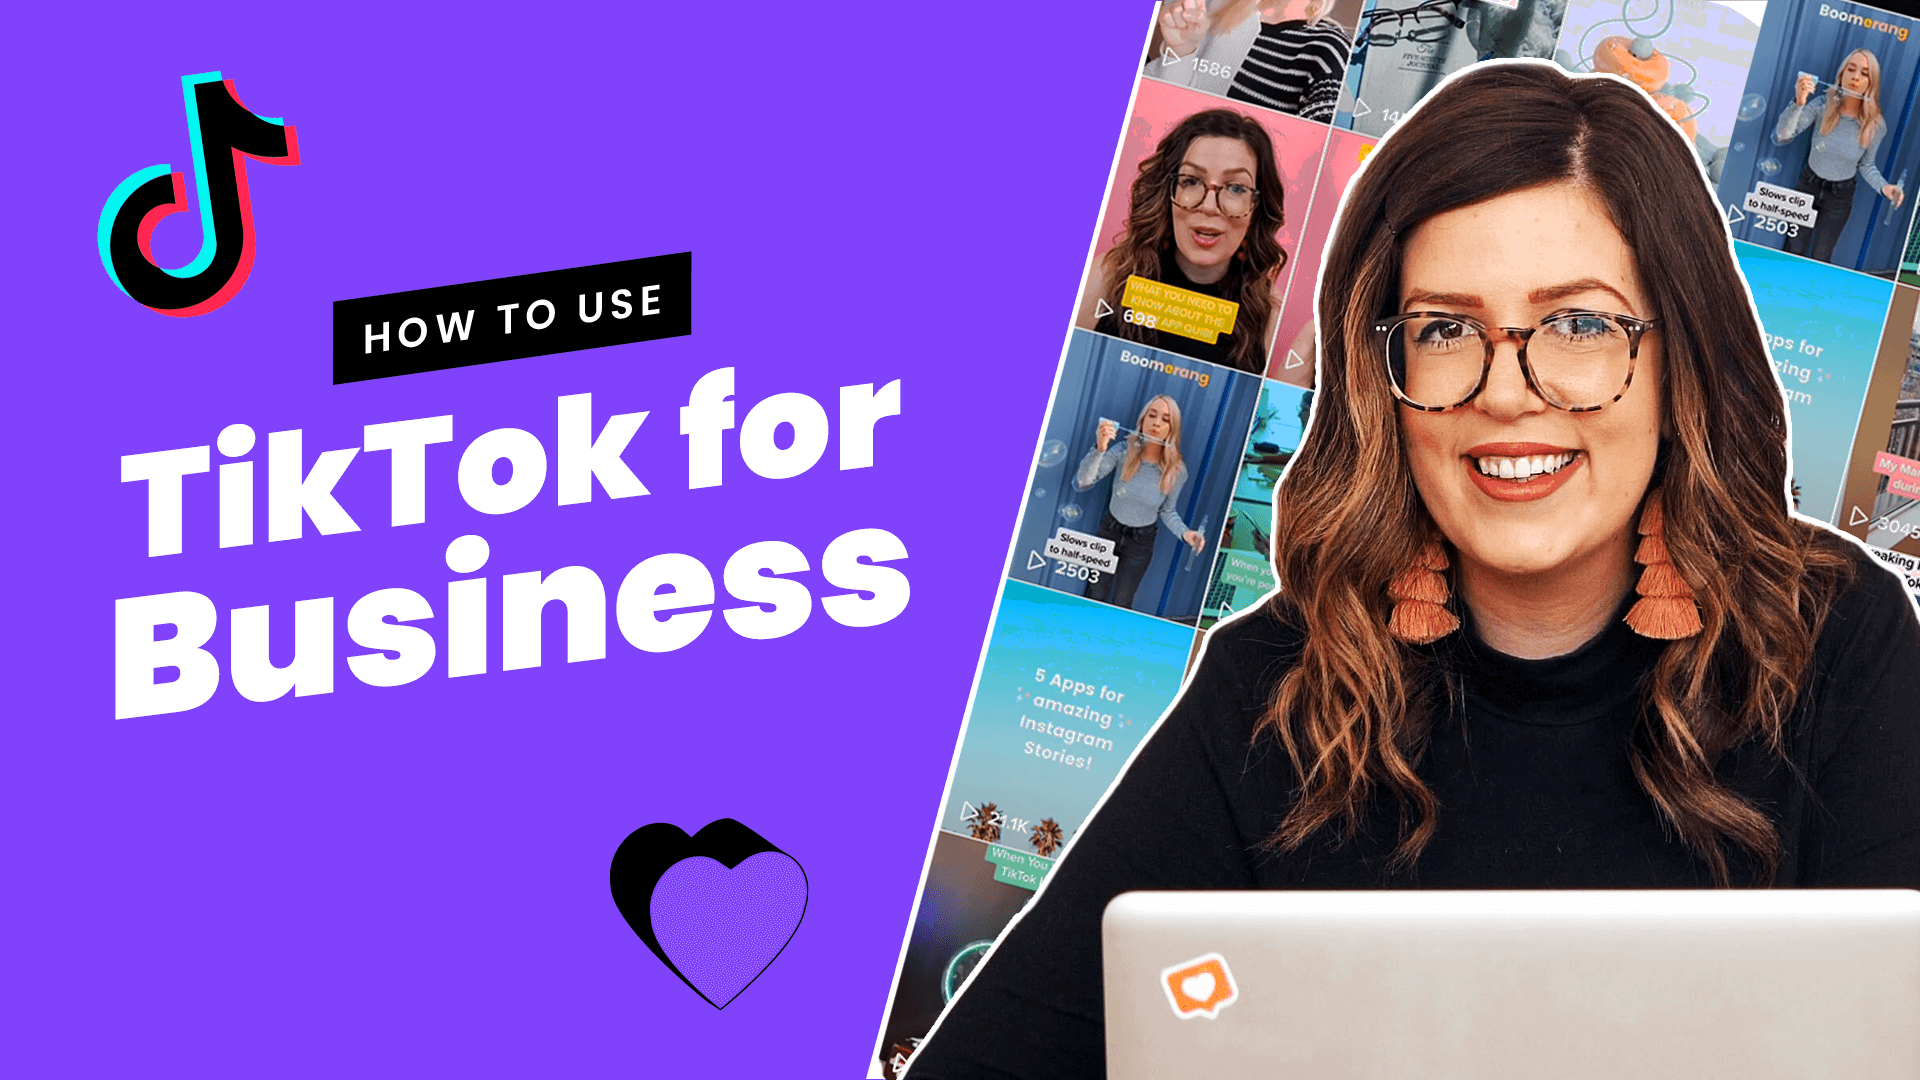 Youtube thumbnail for how to use Tiktok for business video